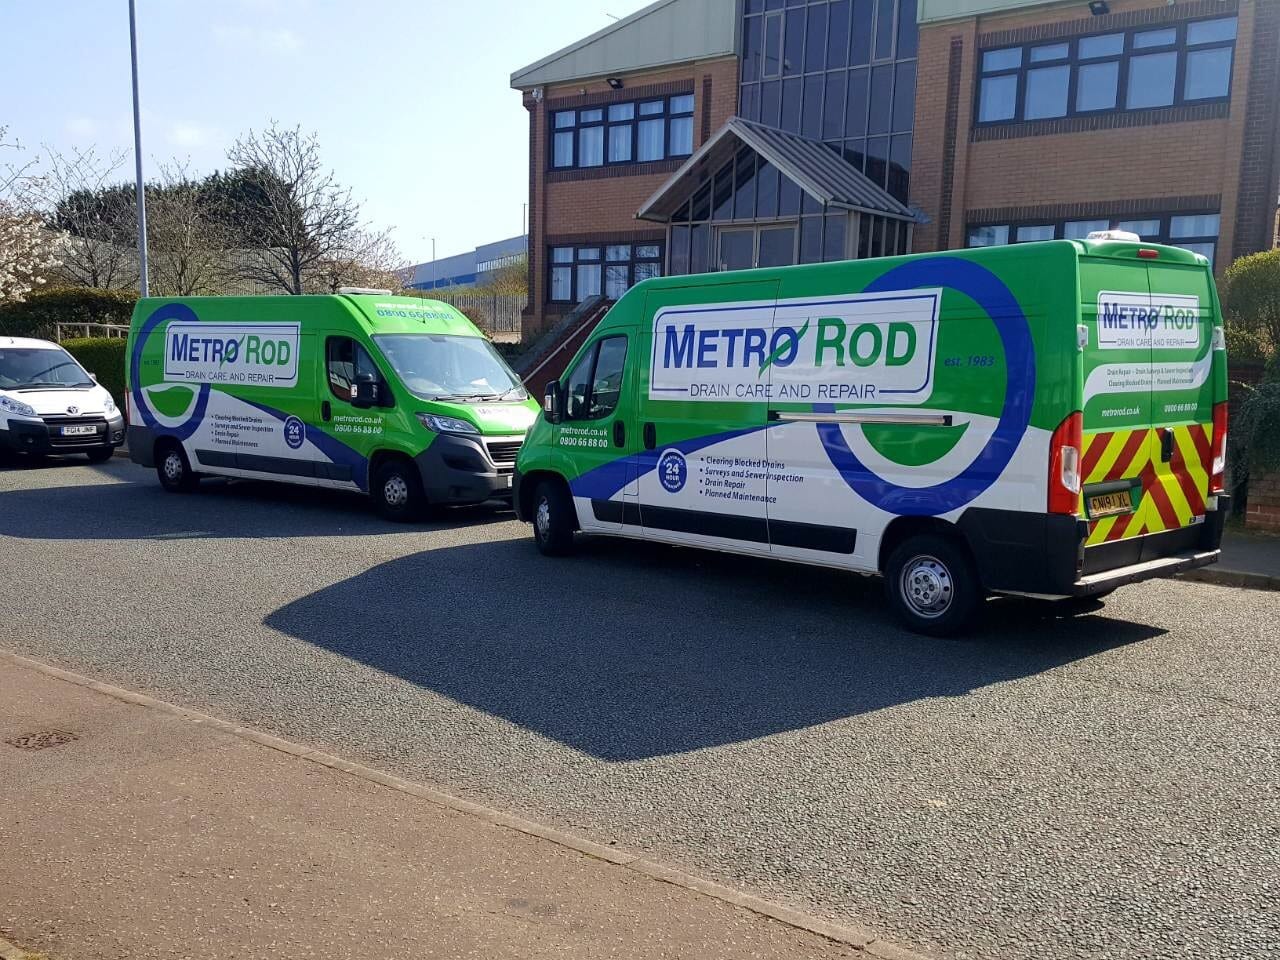 Our new fleet of vans are now on the road